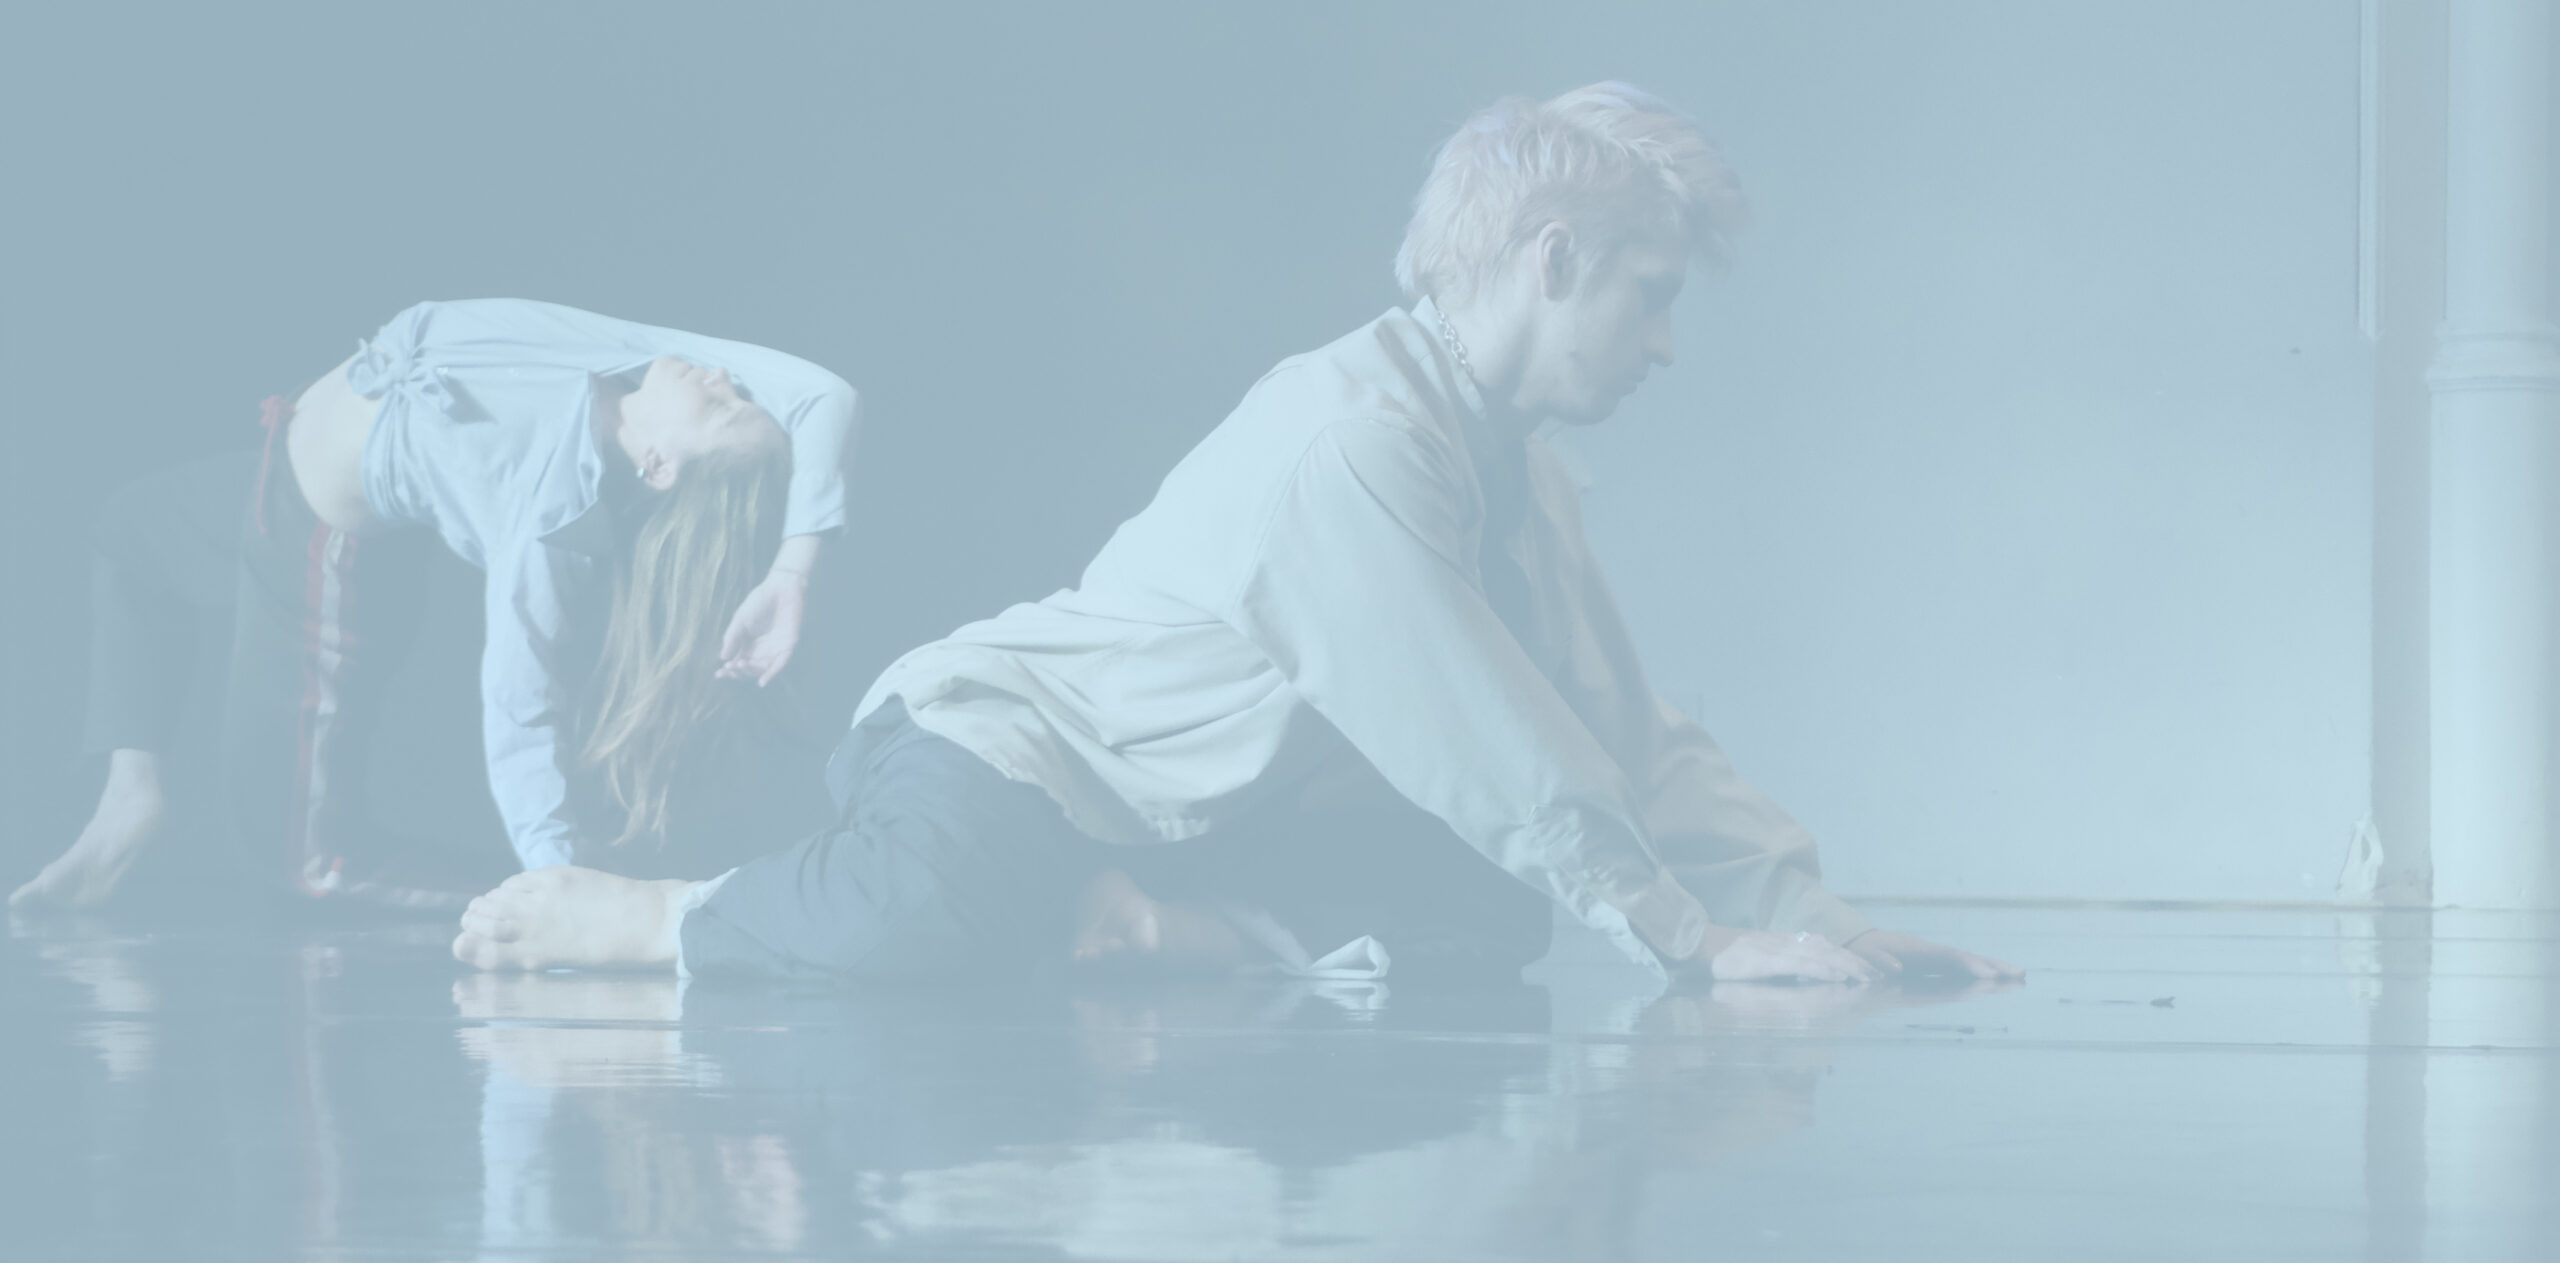 Two dancers are moving on the floor of a studio, and their reflections shimmer across the floor. The dancer on the left is further back and lifts herself into a backwards bridge, holding herself up with one arm and the other arm partially covering her face. The other dancer is closer to the camera, sitting on his shins while putting his hands on the ground in front of him and looking down. There is a pastel blue wash over the photo.